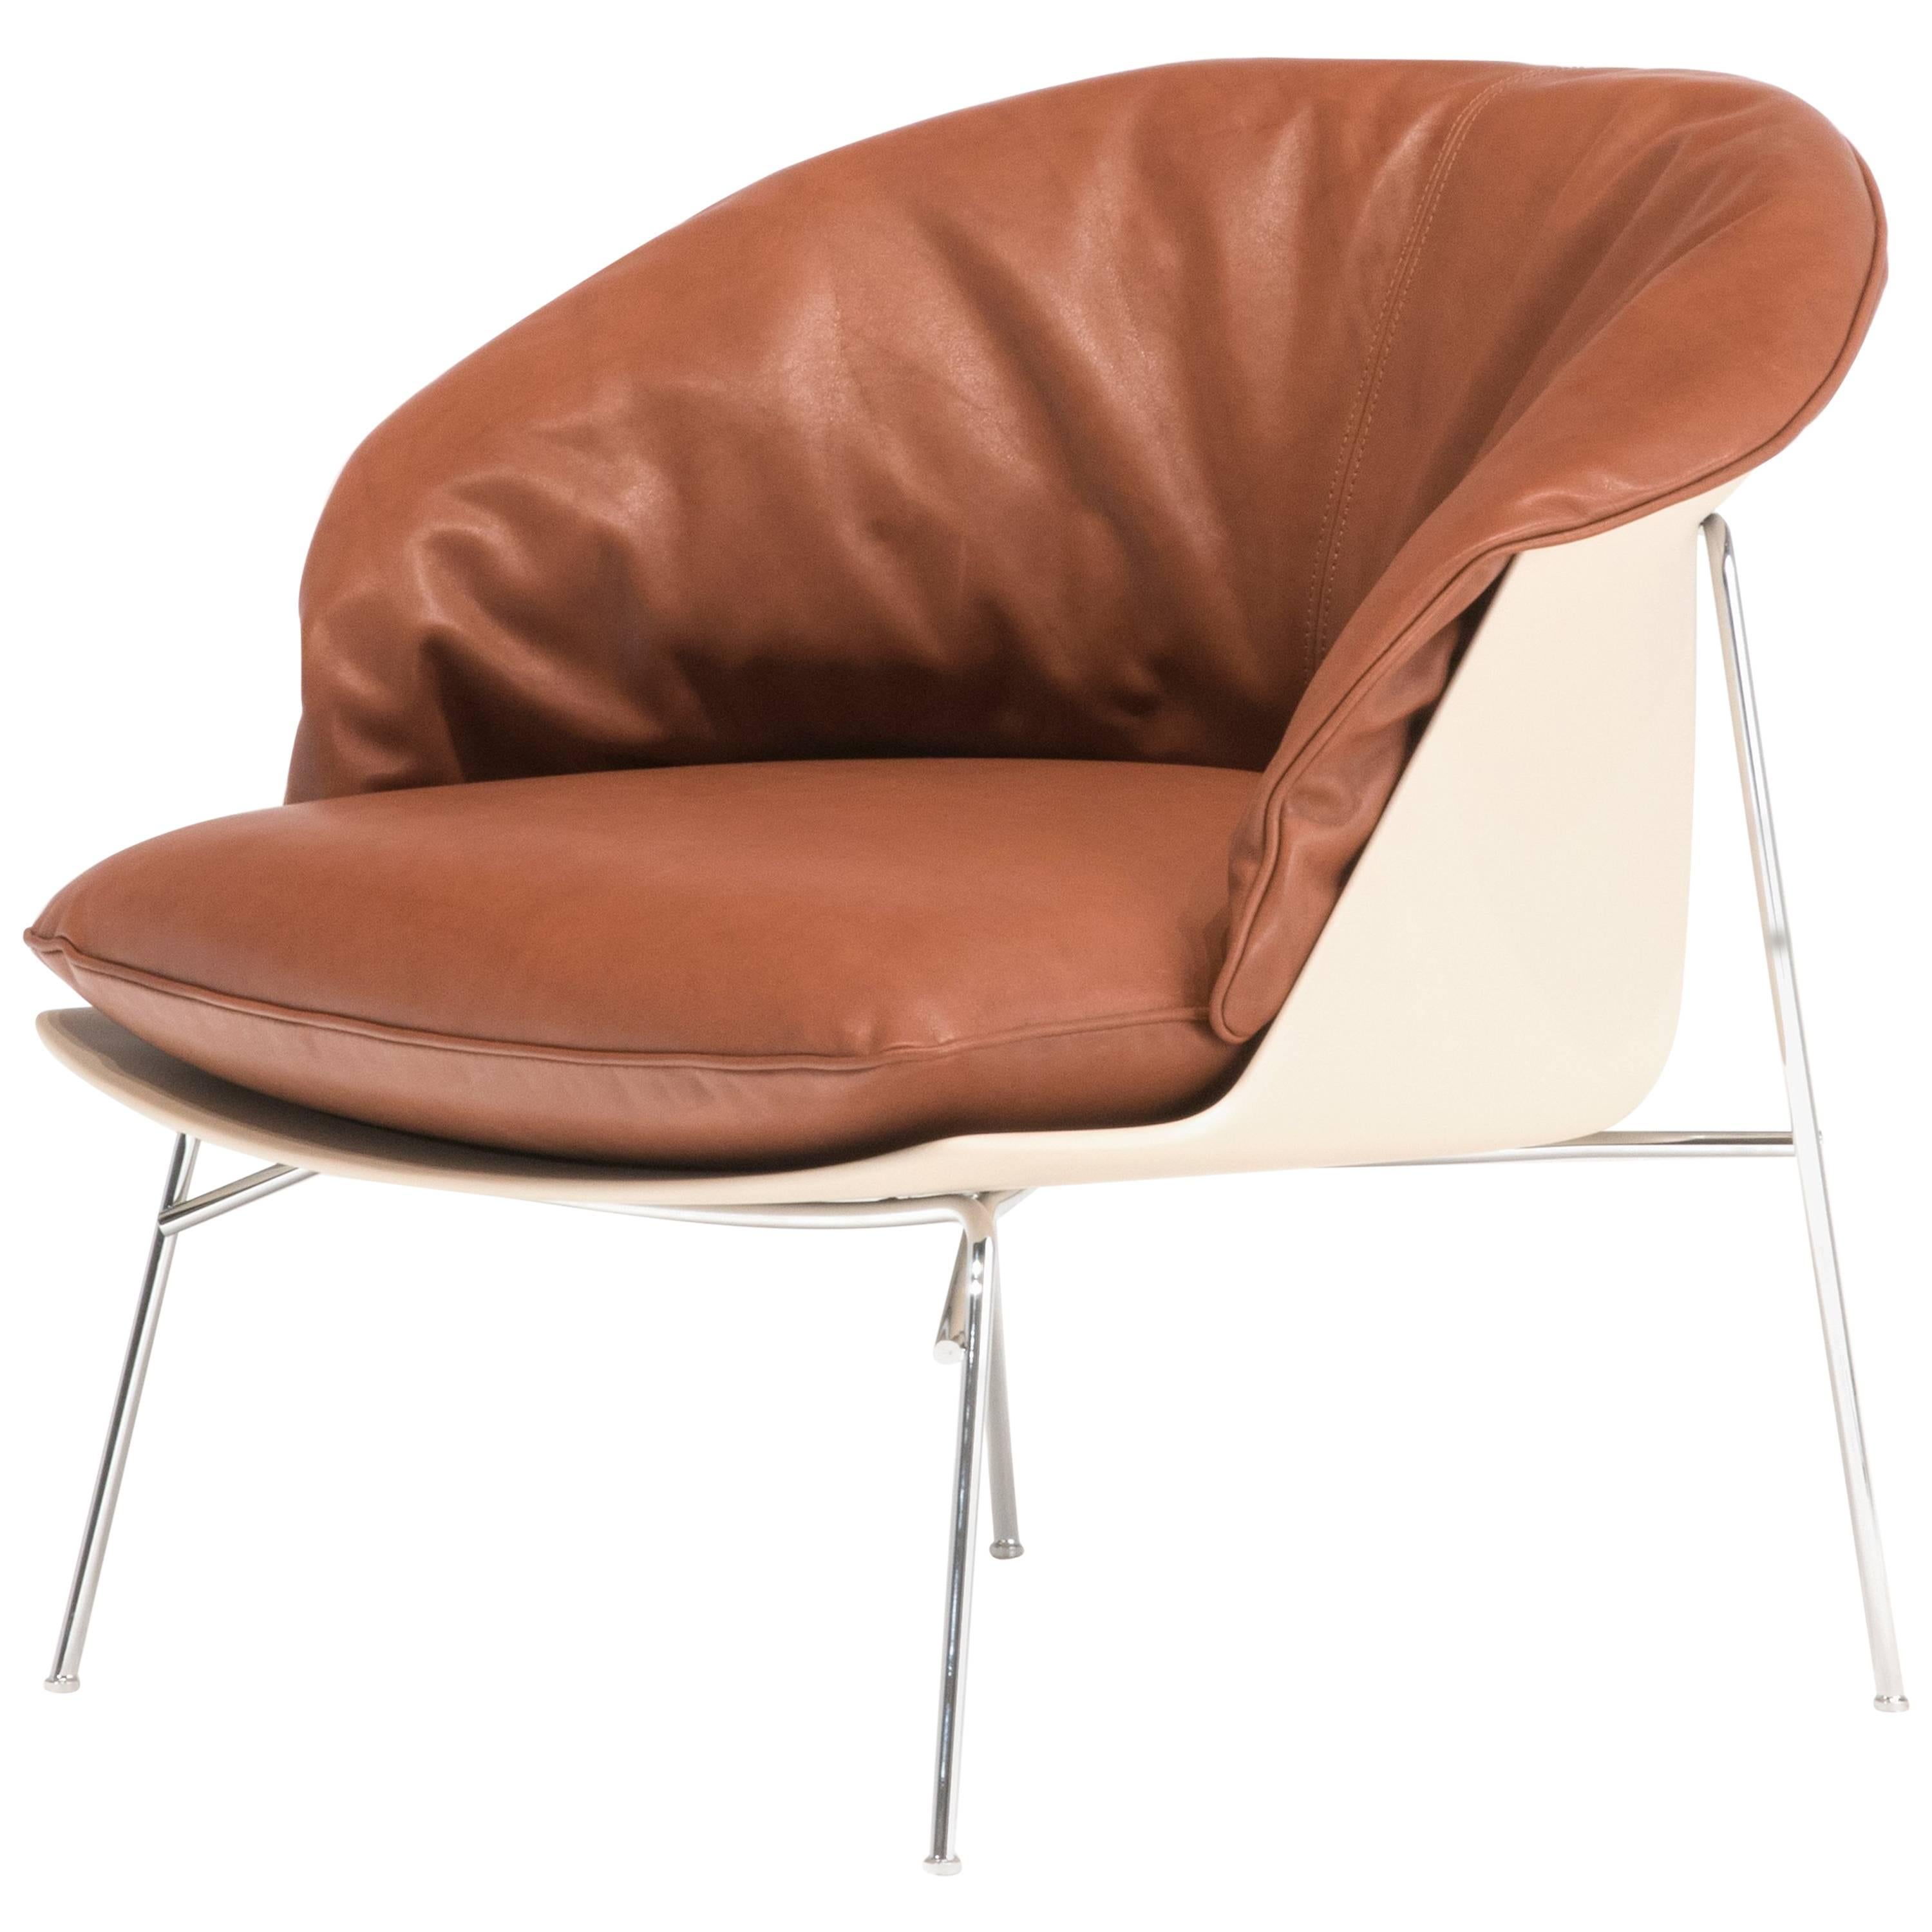 Moon Armchair in Beige with Brown Leather Cushion by Ludovica & Roberto Palomba